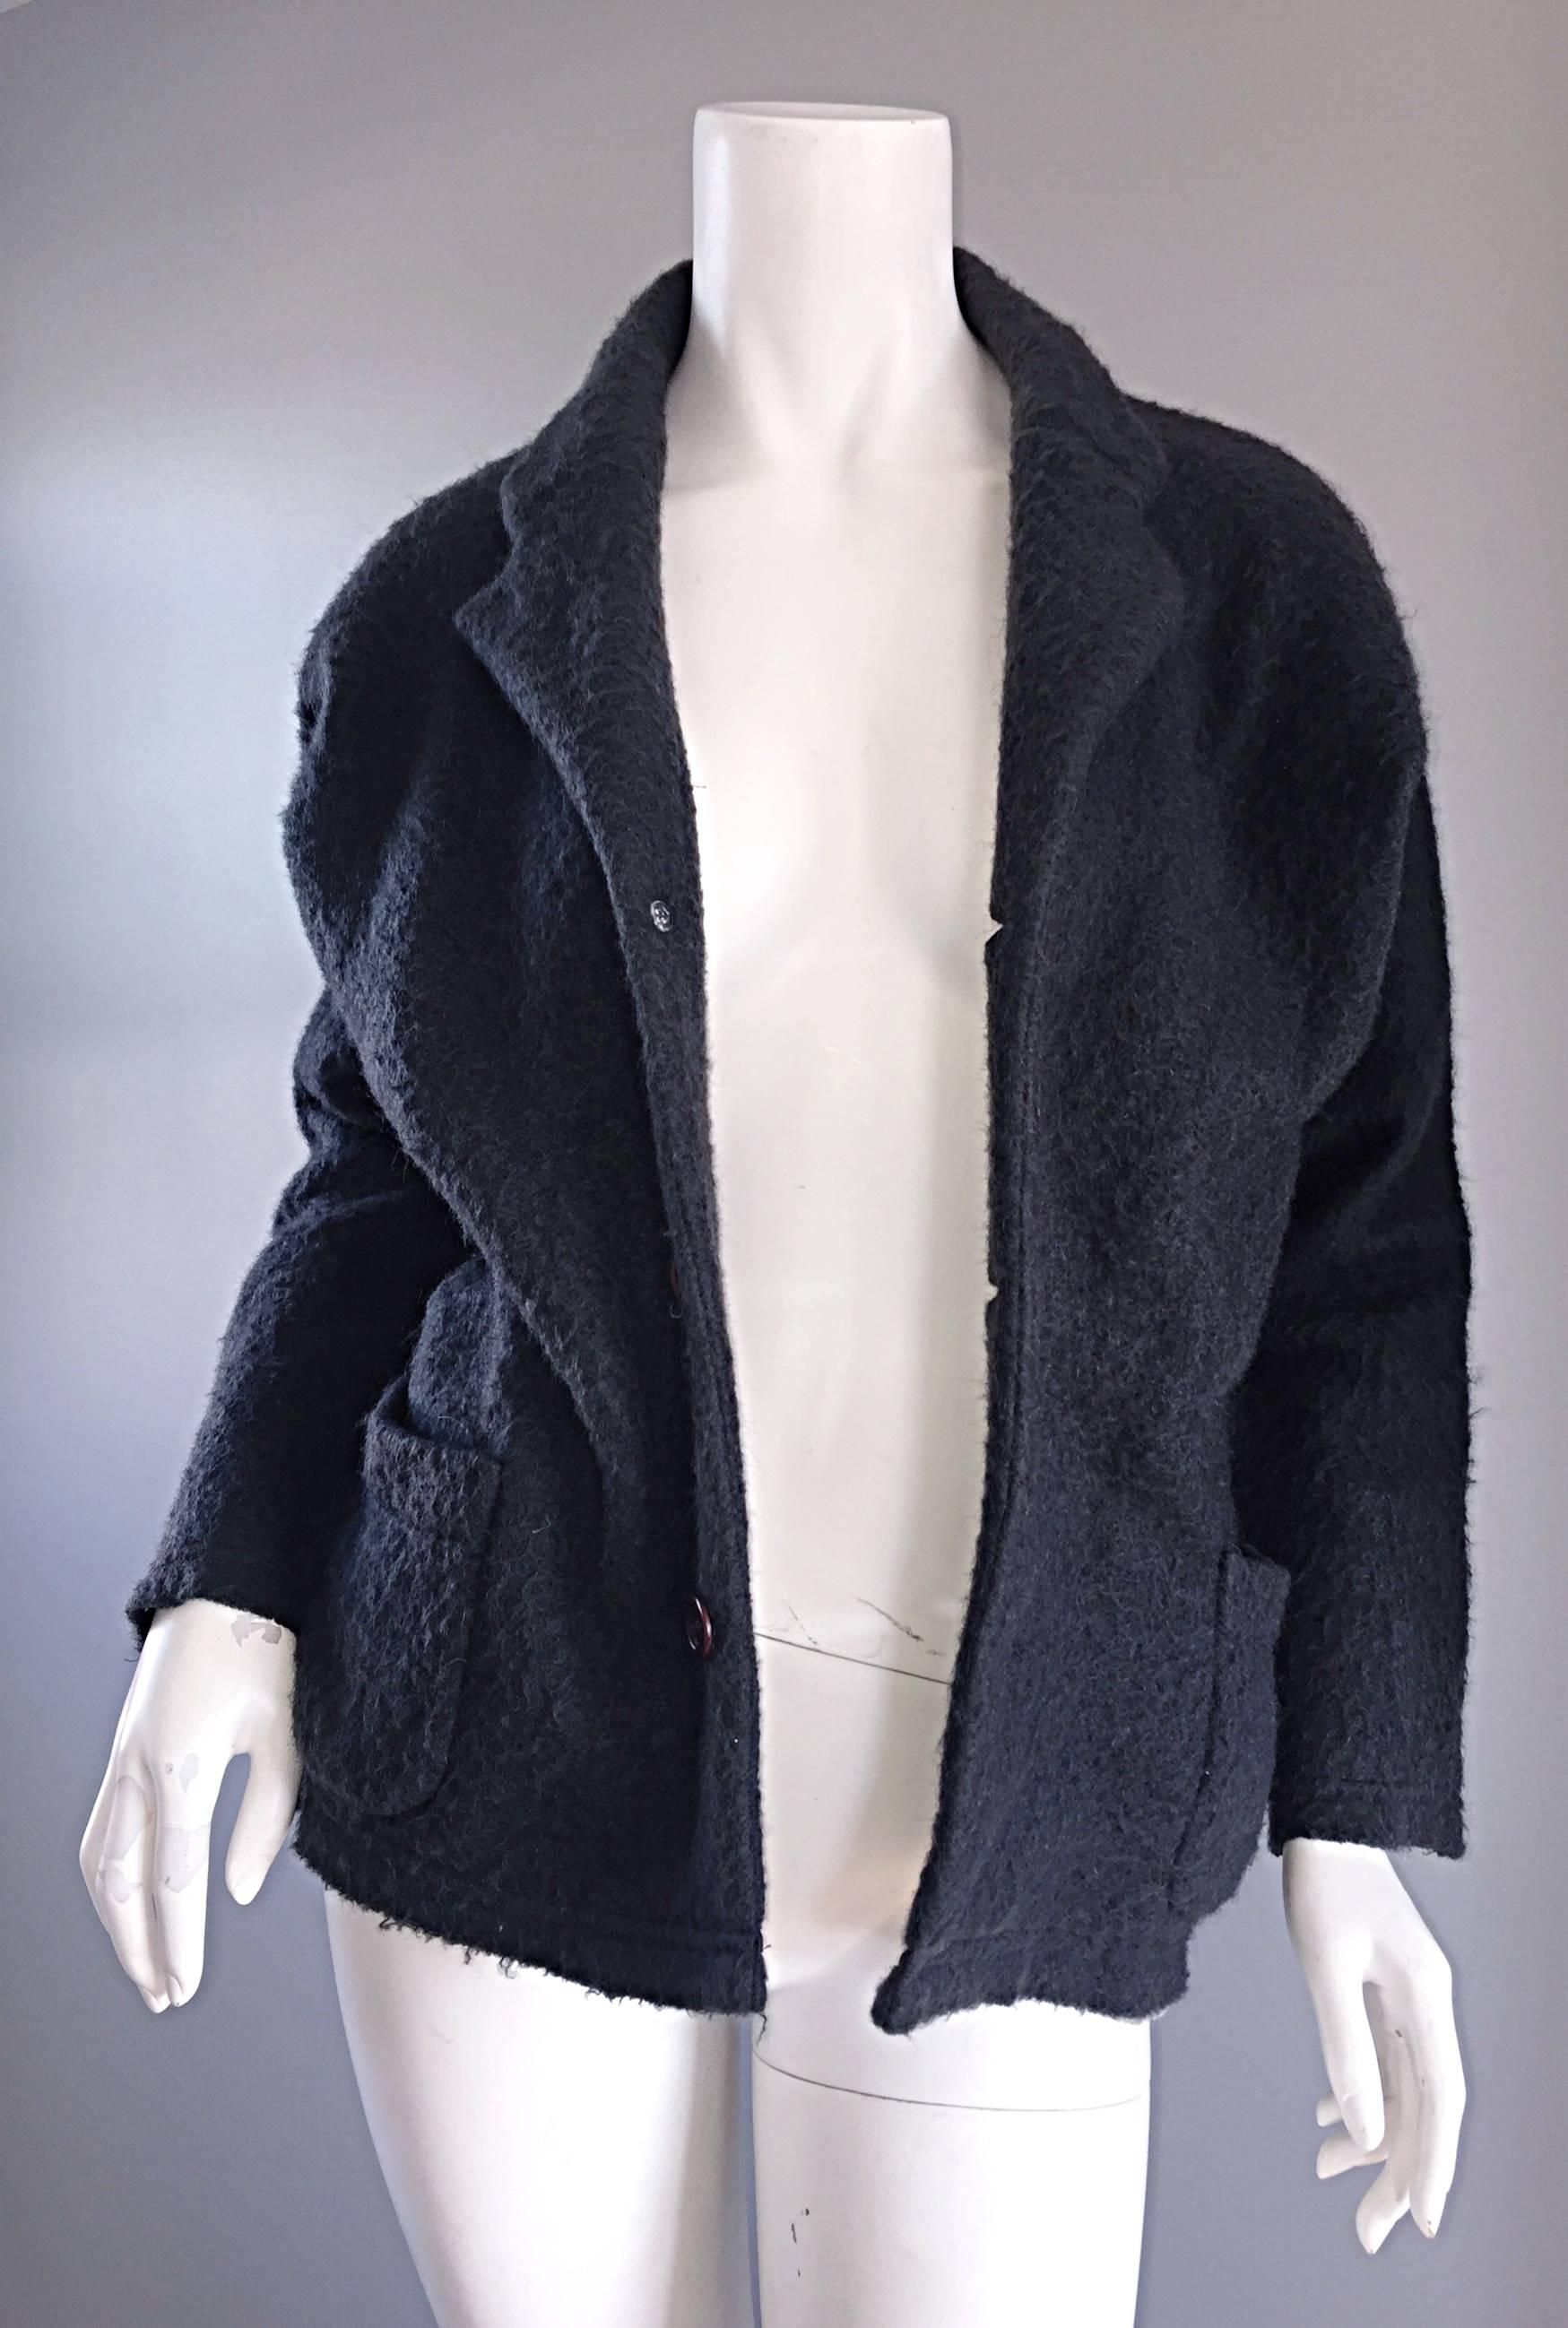 Vintage Comme des Garcons 1990s Charcoal Gray Mohair Slouchy 90s Blazer Jacket In Excellent Condition For Sale In San Diego, CA